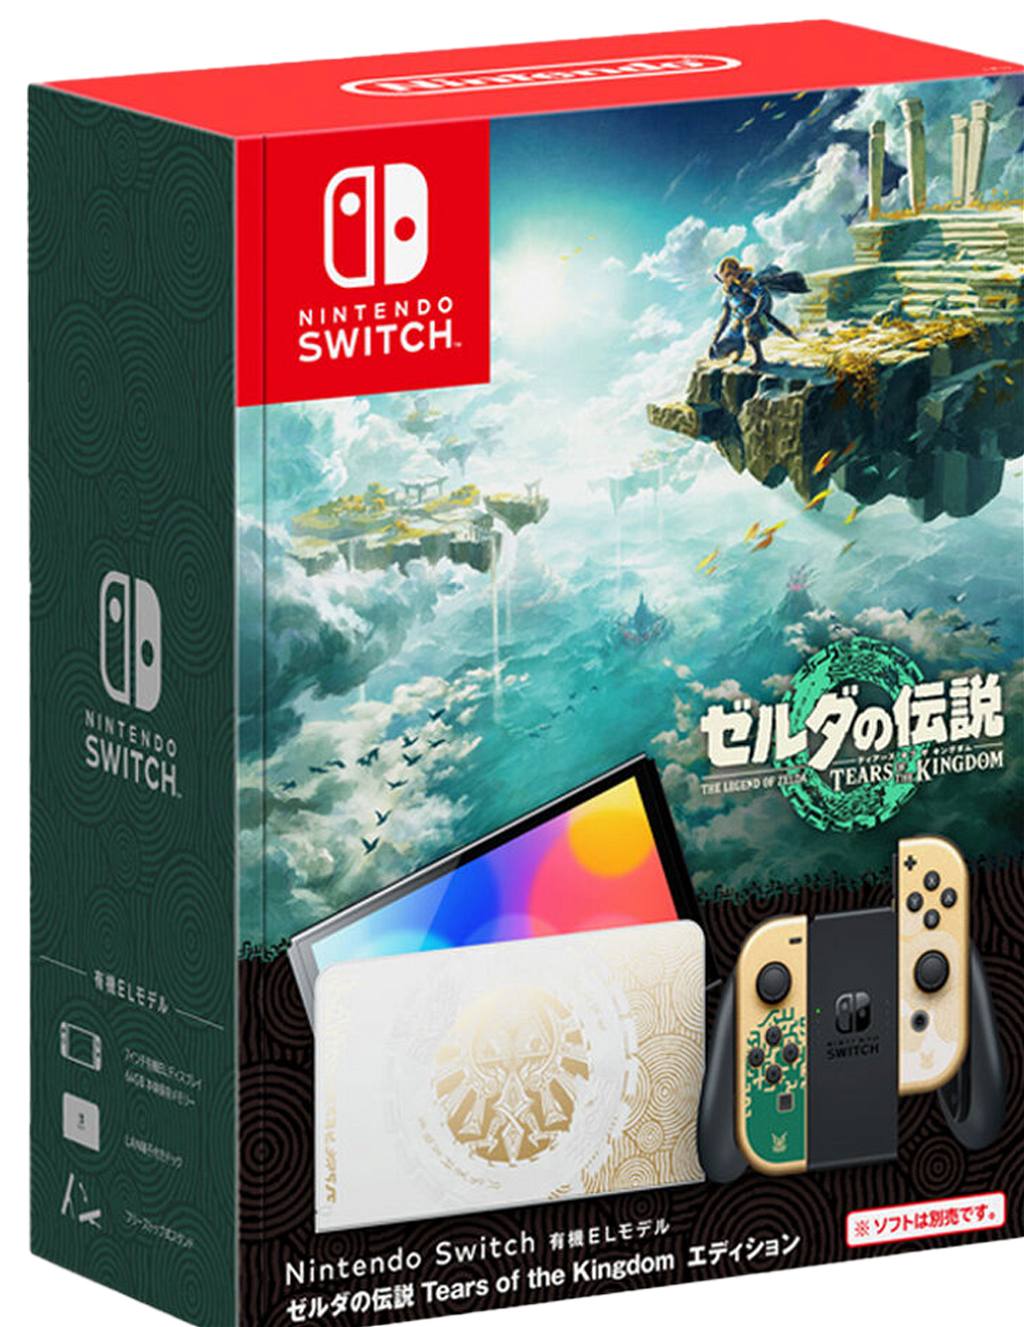 Nintendo Switch OLED Model [The Legend of Zelda: Tears the Kingdom Edition] (Limited Edition)